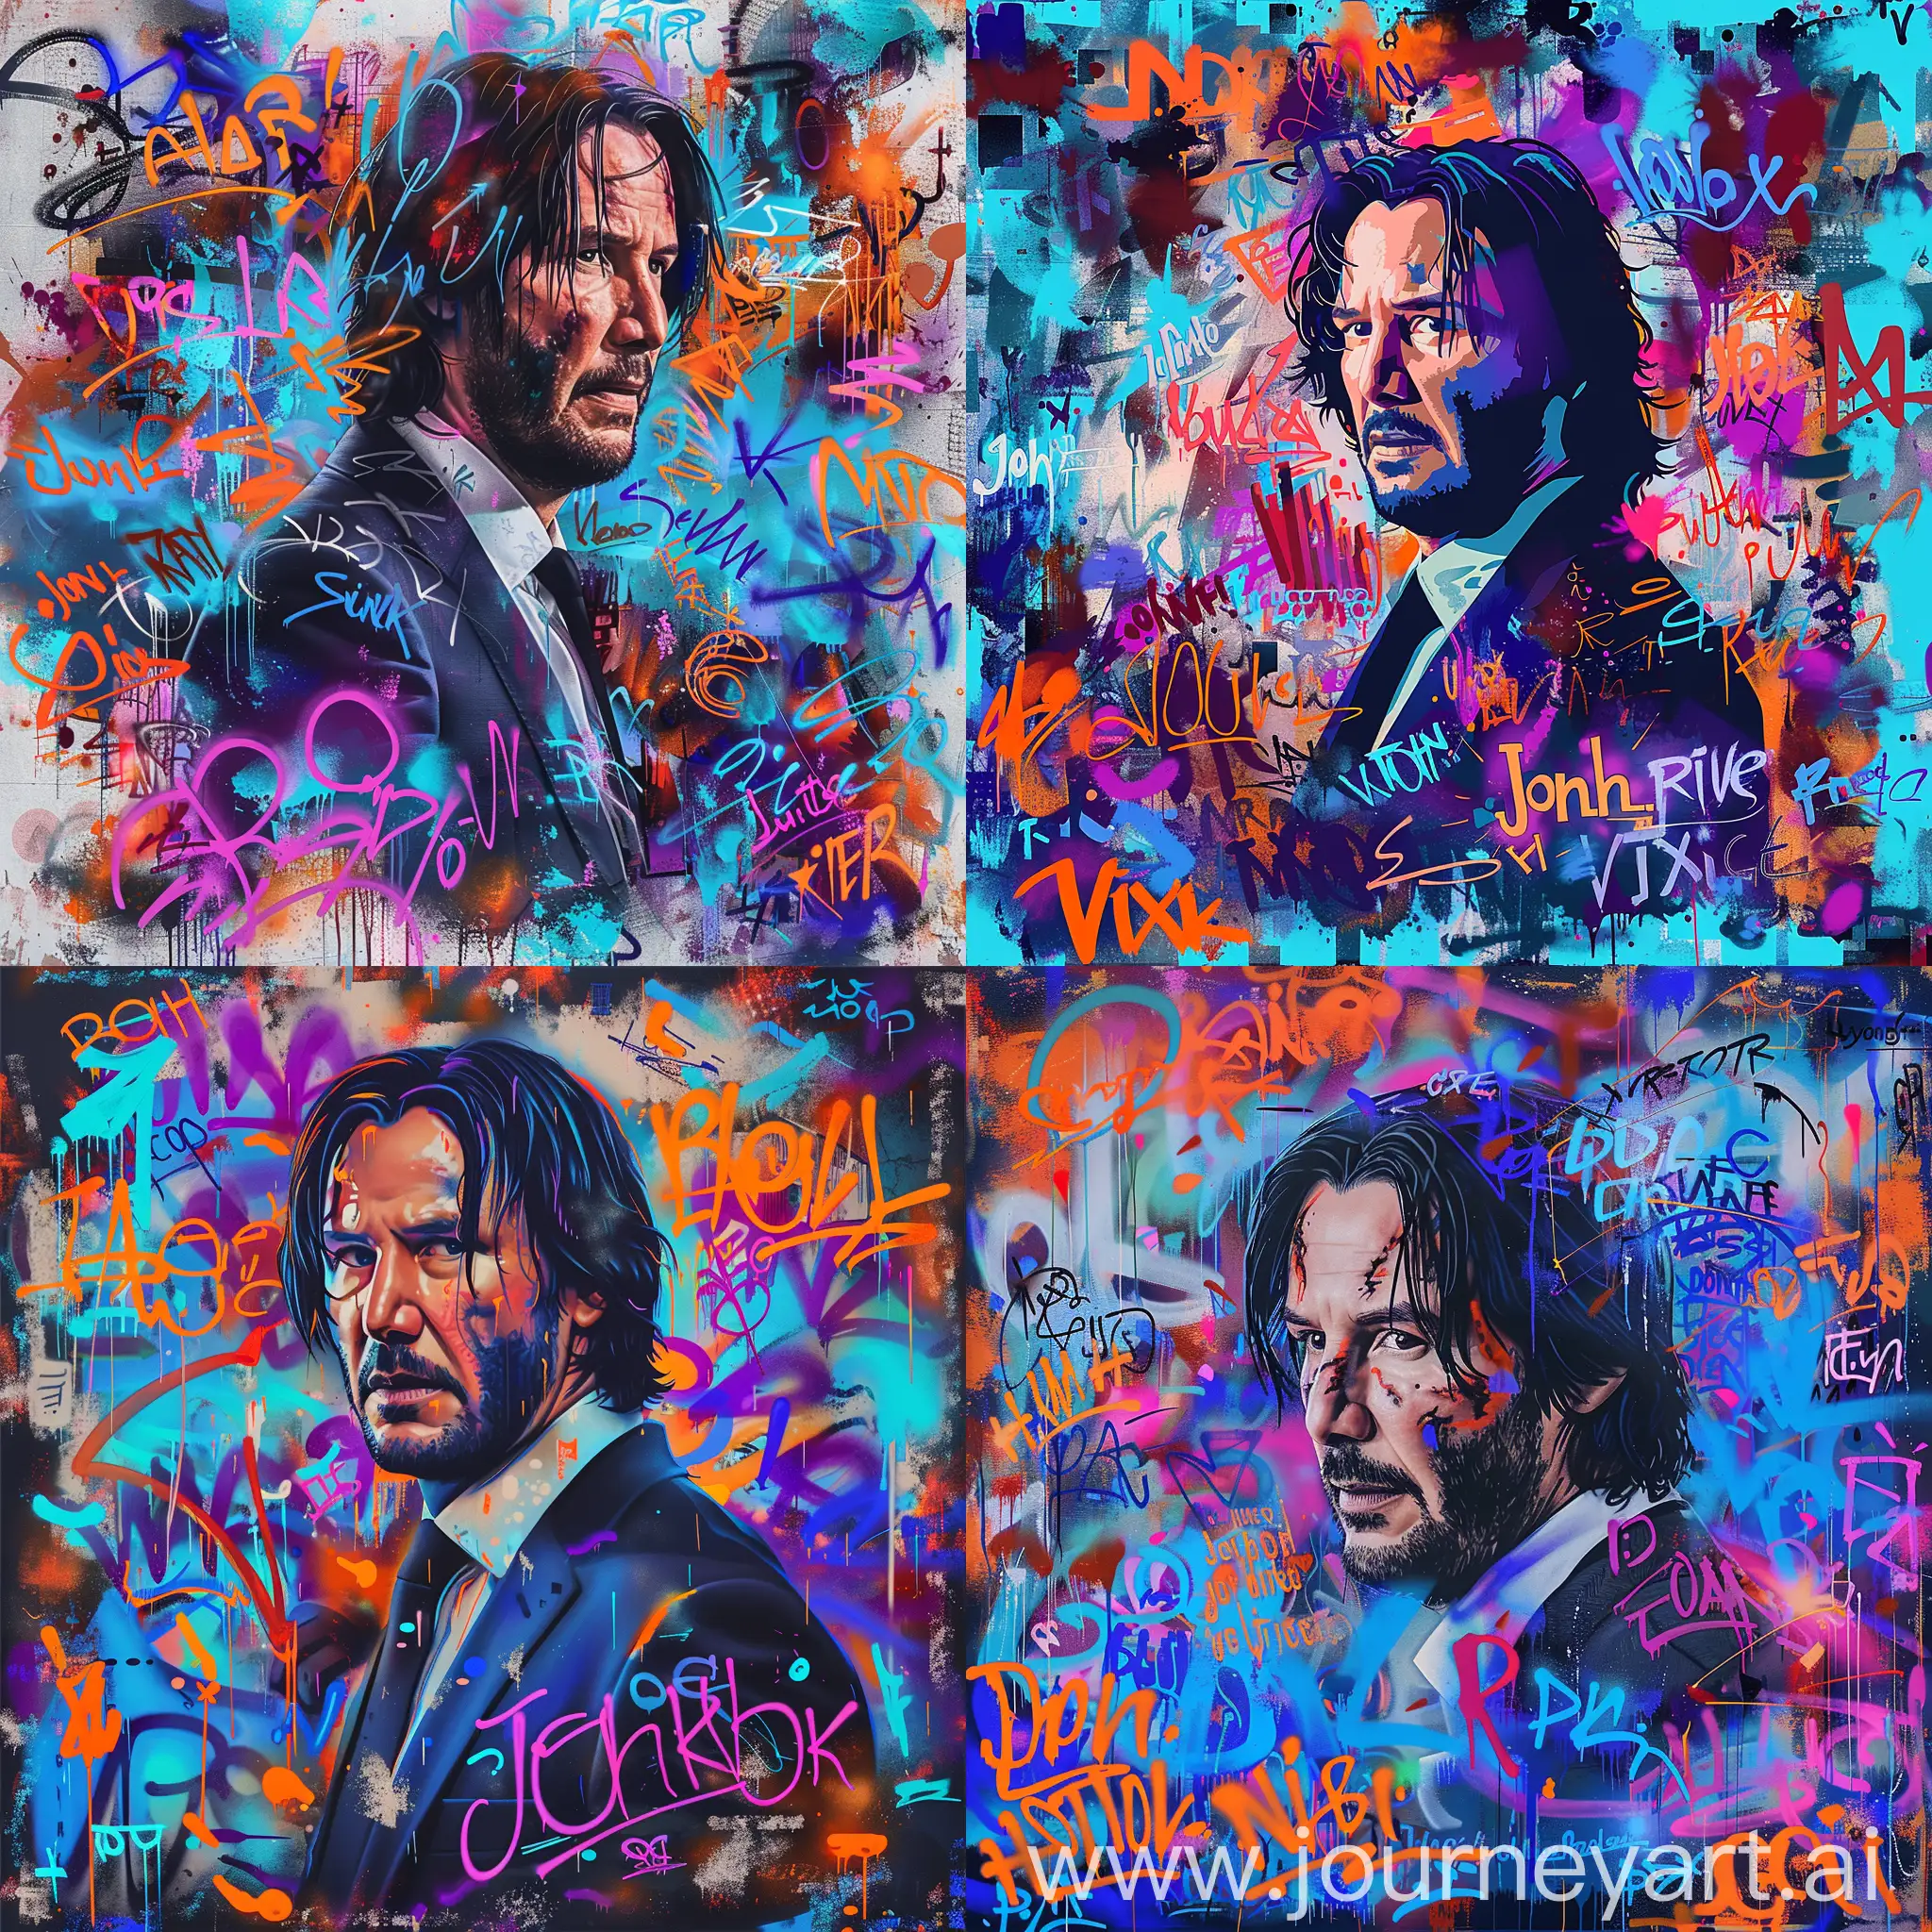 Create a stylized portrait with graffiti-like elements overlaying and surrounding john wick. The background and surrounding space should be filled with vibrant, expressive graffiti in colors such as blue, purple, orange, and red. Include various words and tags written in different styles Emulate the dynamic and energetic feel of street art while combining it with the formality of a portrait to contrast with the colorful content. --c 5